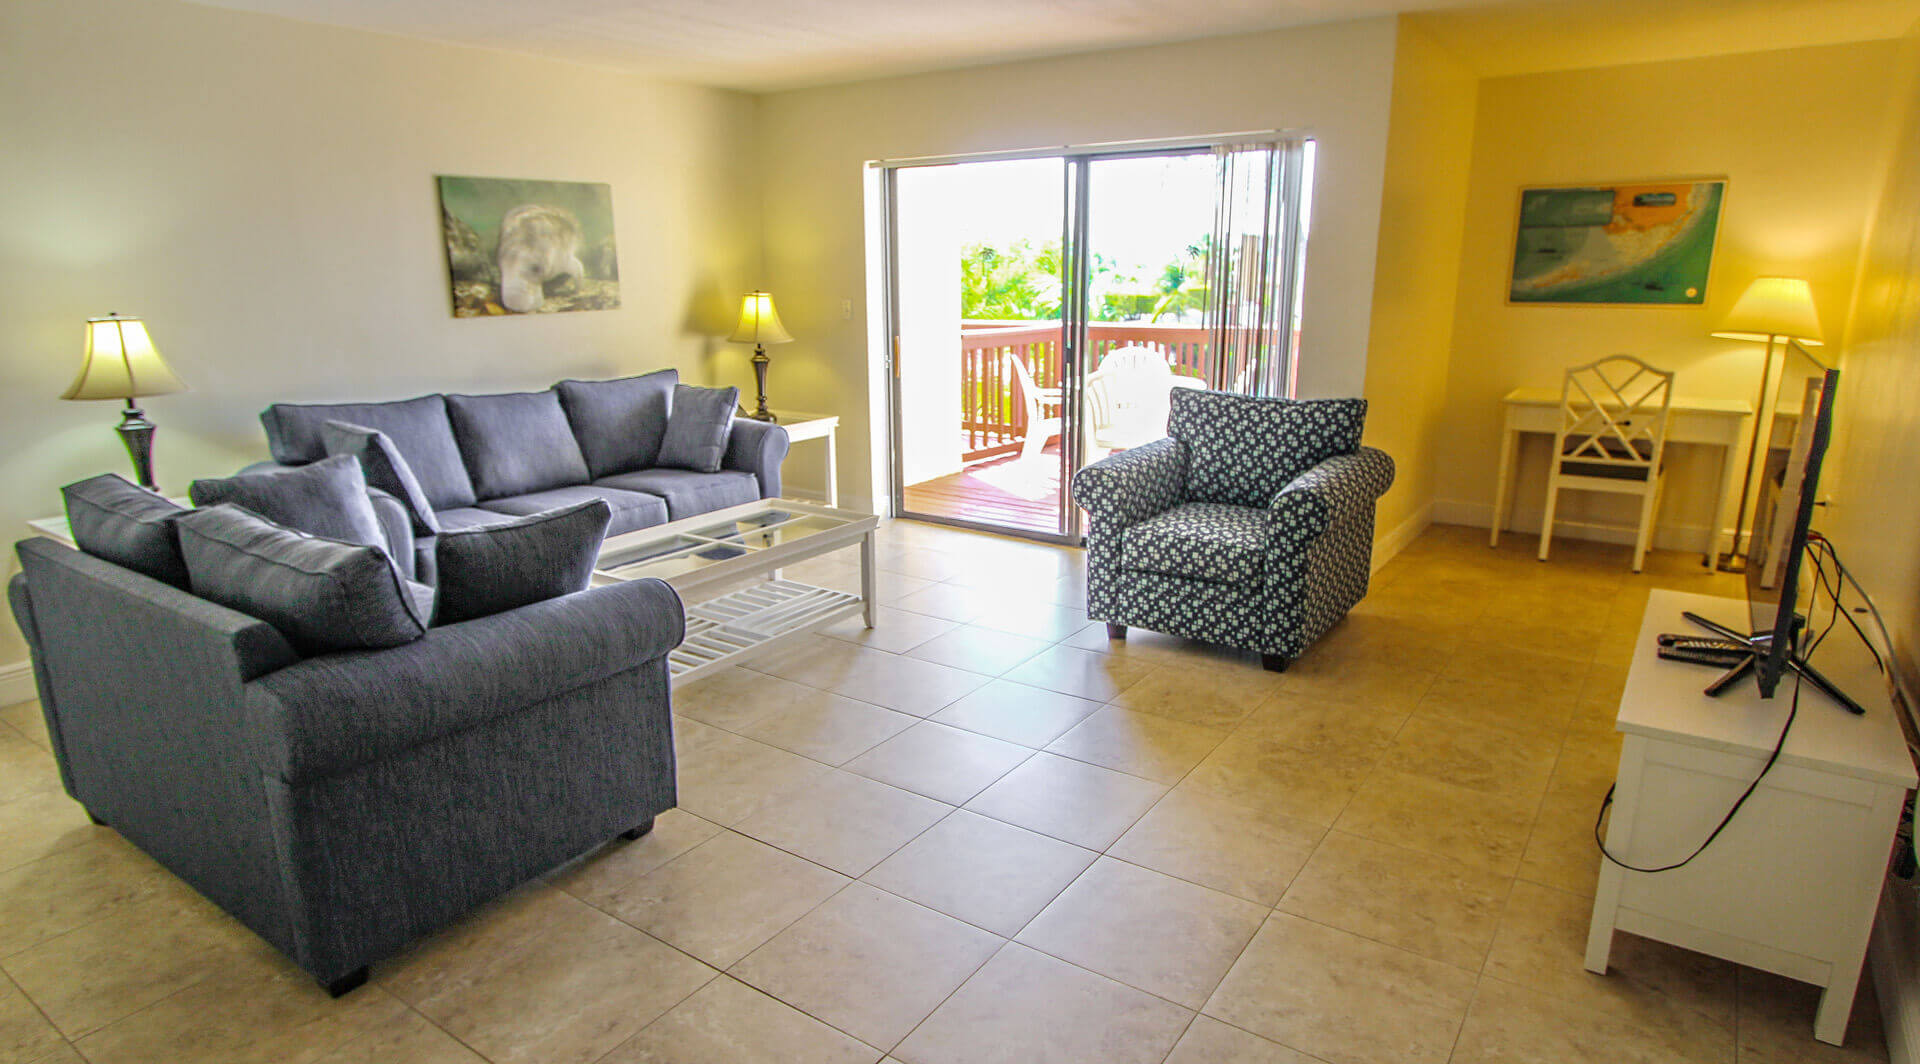 An expansive living room area at VRI's Florida Bay Club in Florida.